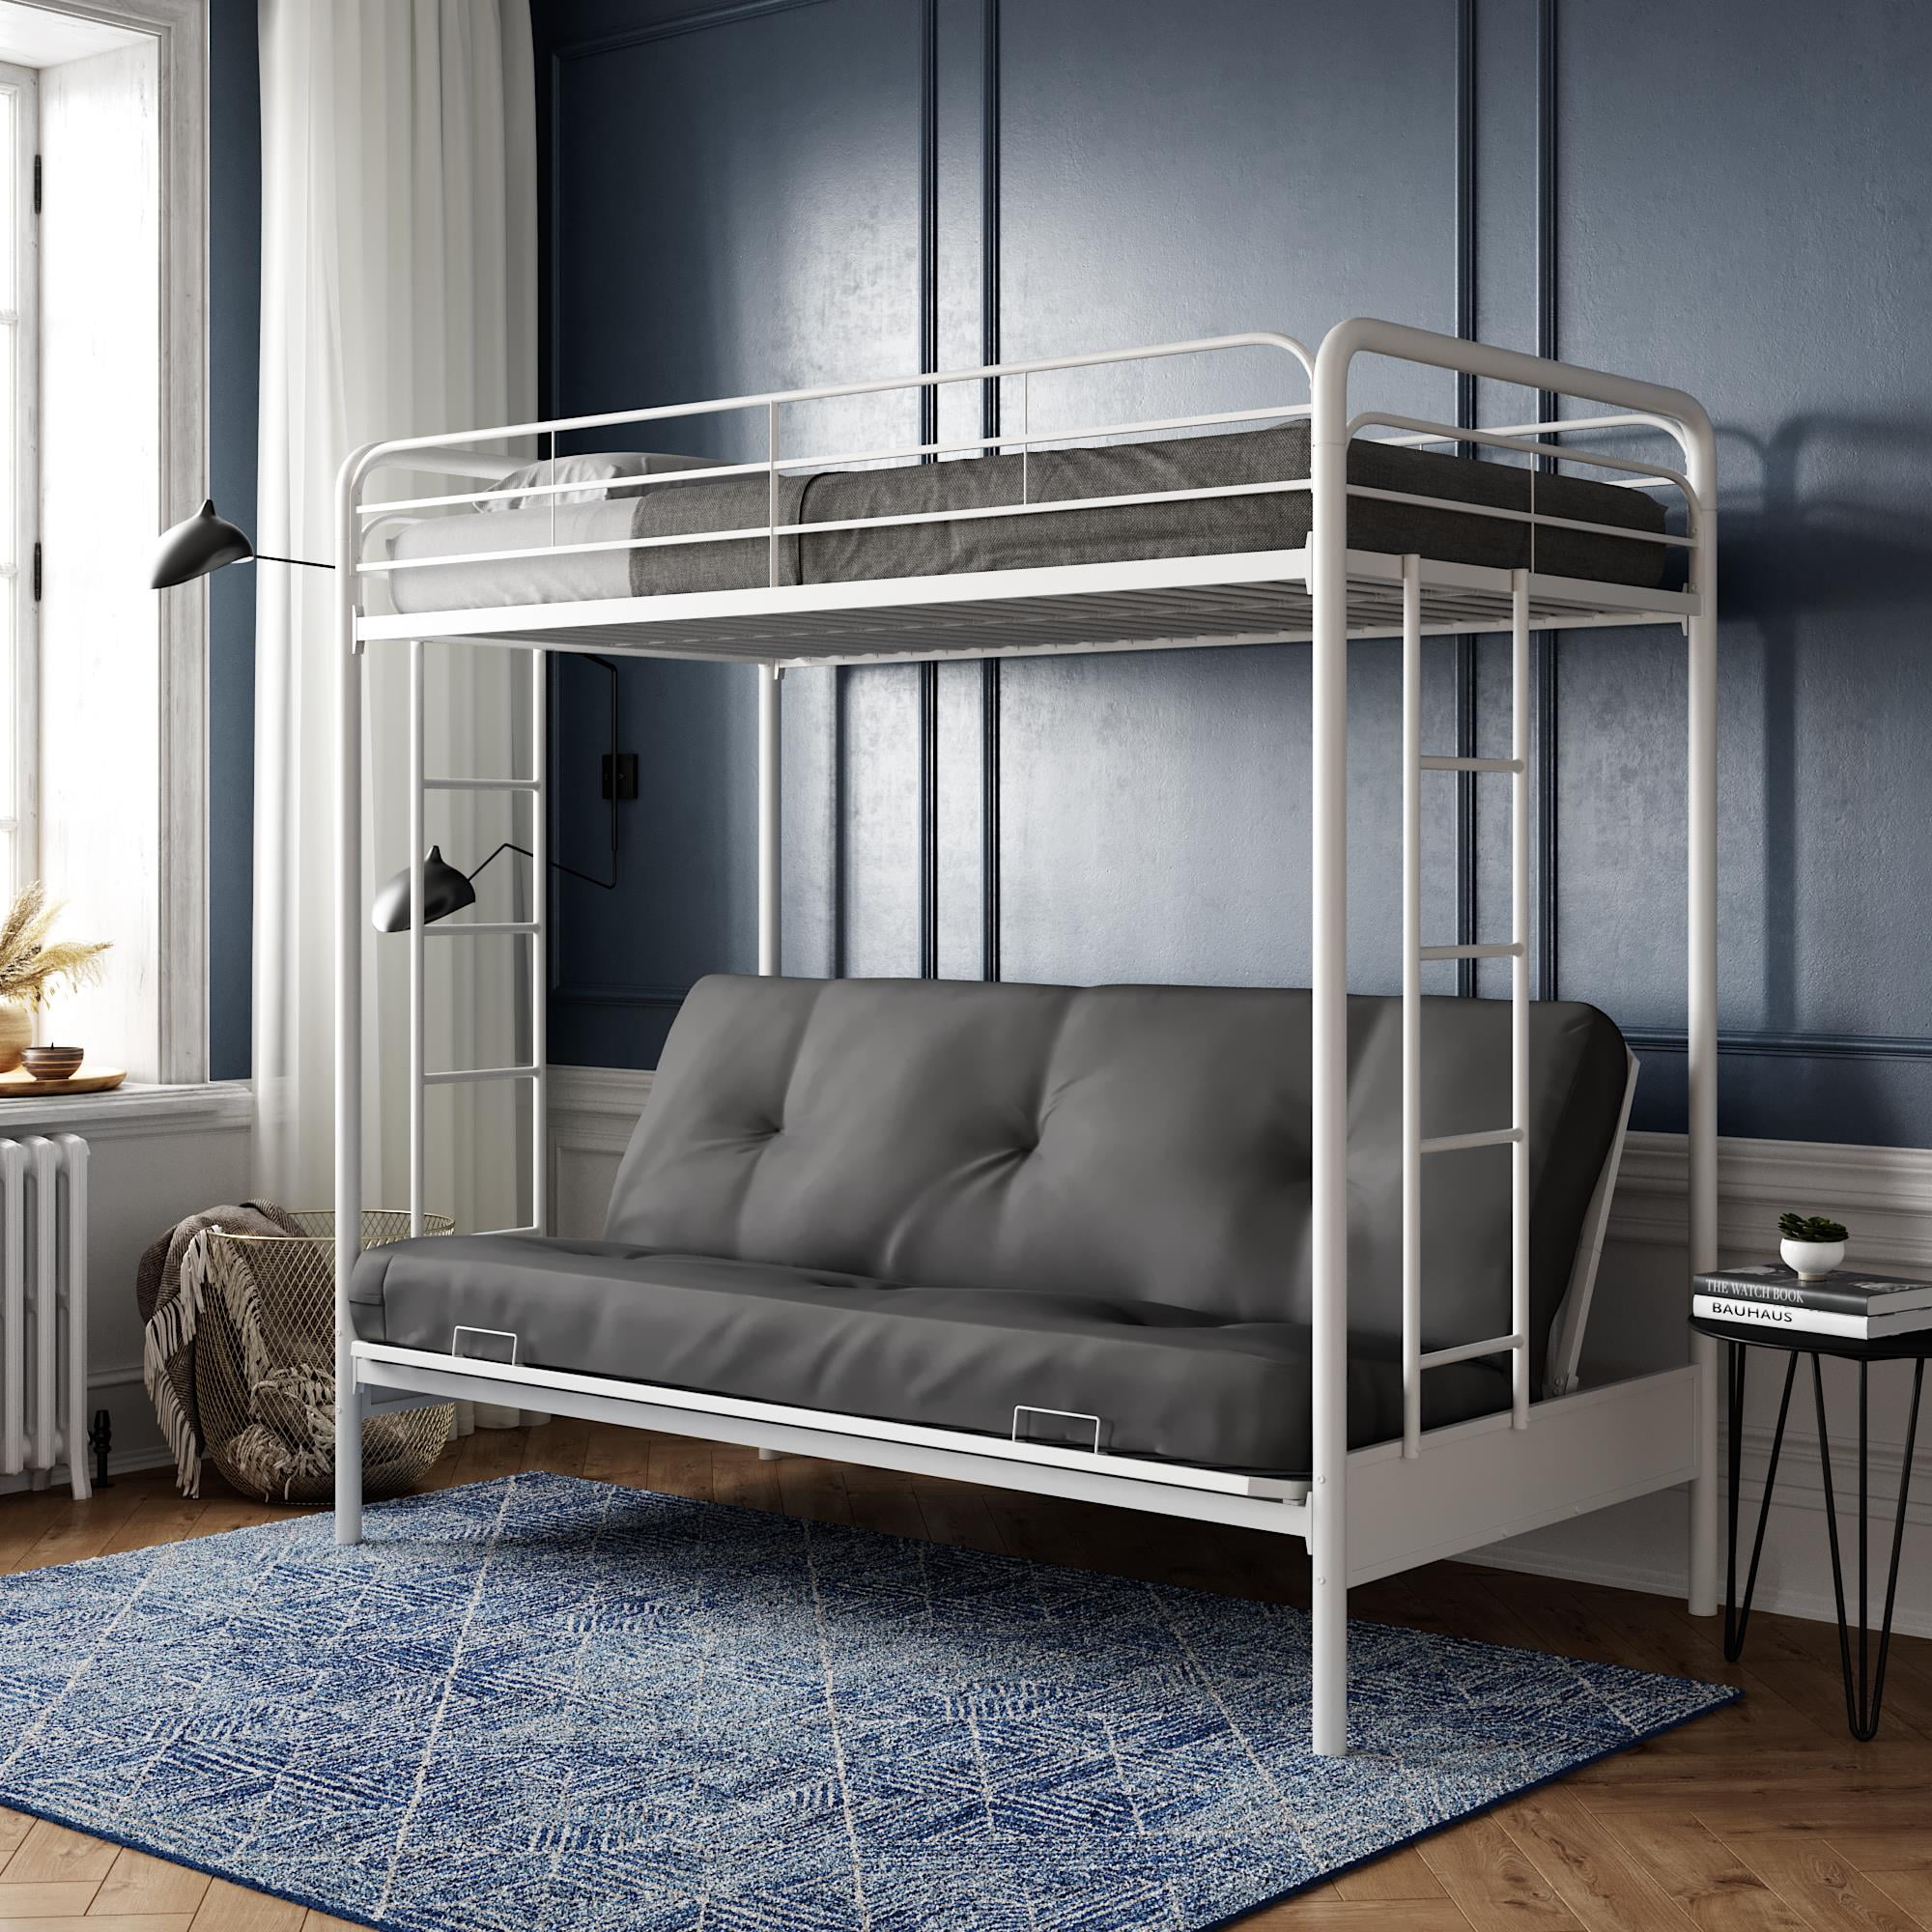 Dhp Twin Over Futon Metal Bunk Bed, How To Put A Bunk Bed Futon Together